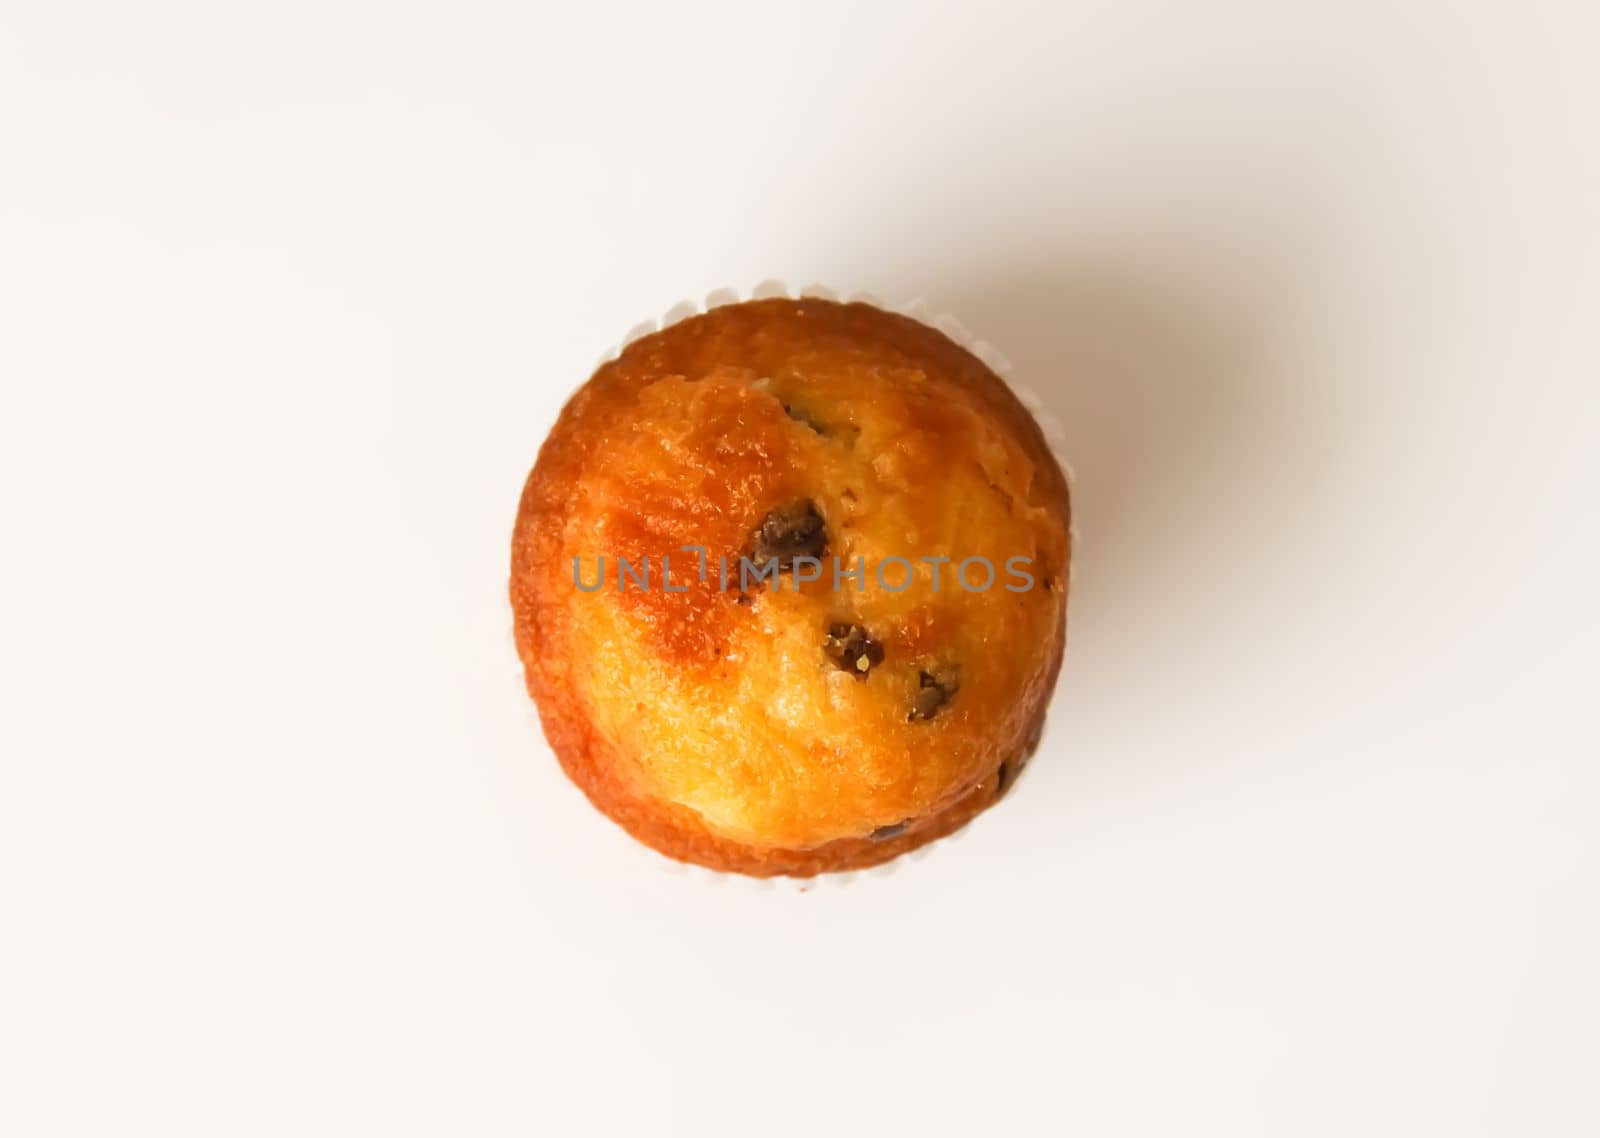 Sweet muffin cup cake closeup on white background.